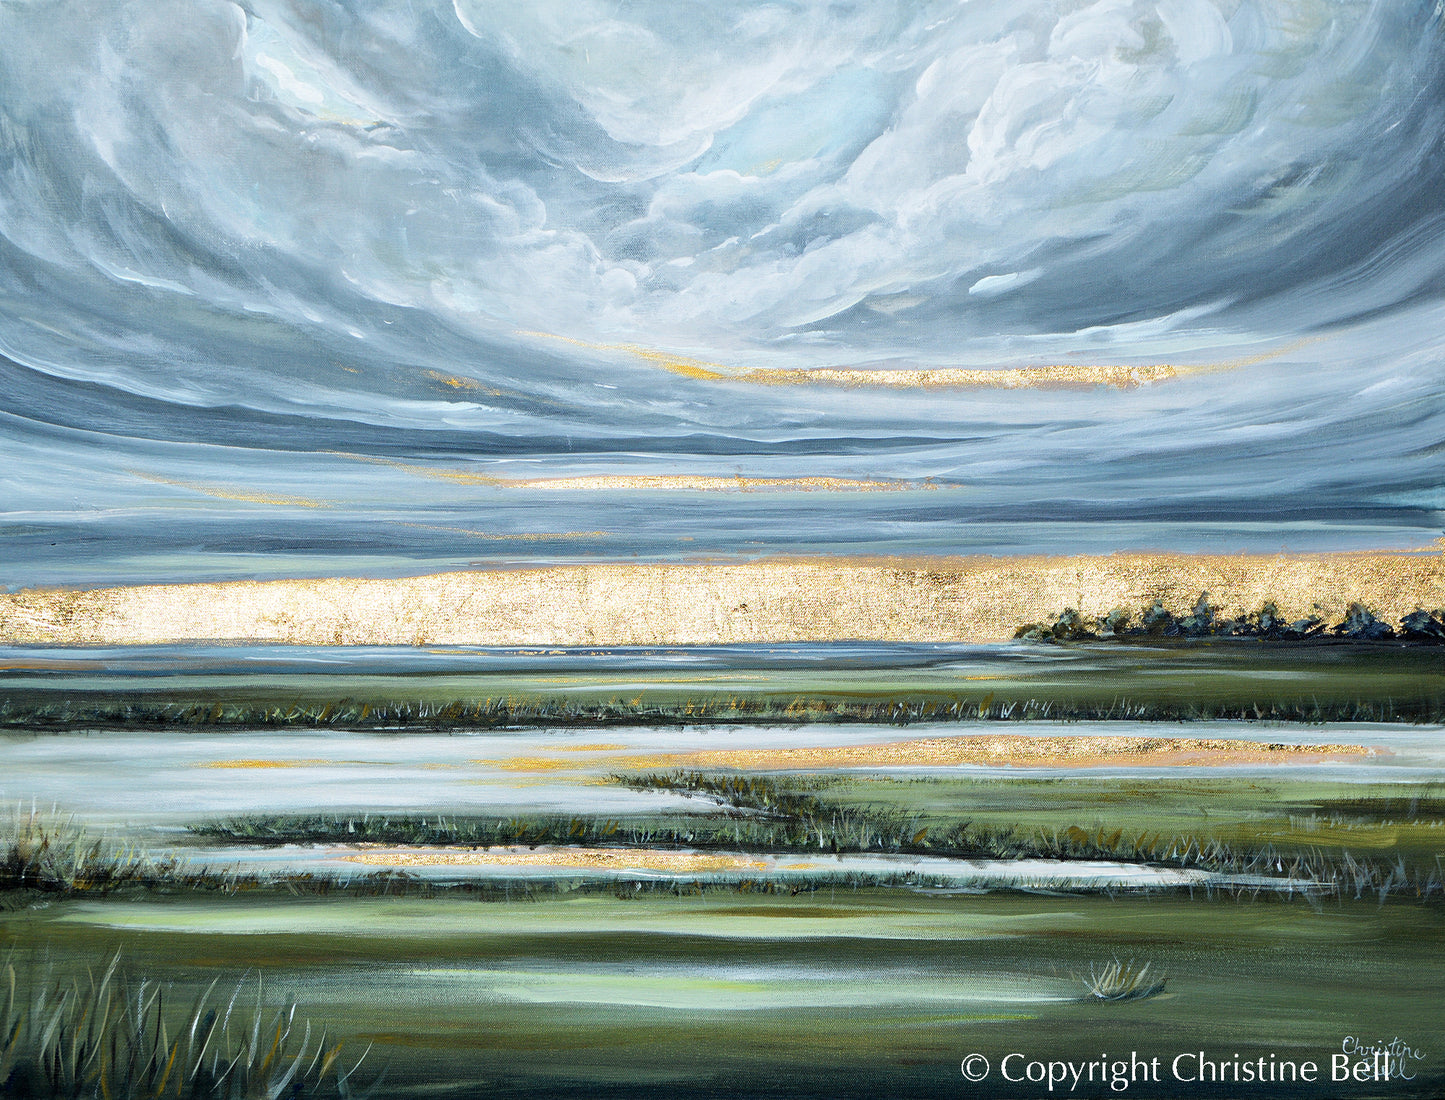 "There's Light on the Horizon" ORIGINAL PAINTING, Modern Impressionist Landscape / Seascape with Gold Leaf